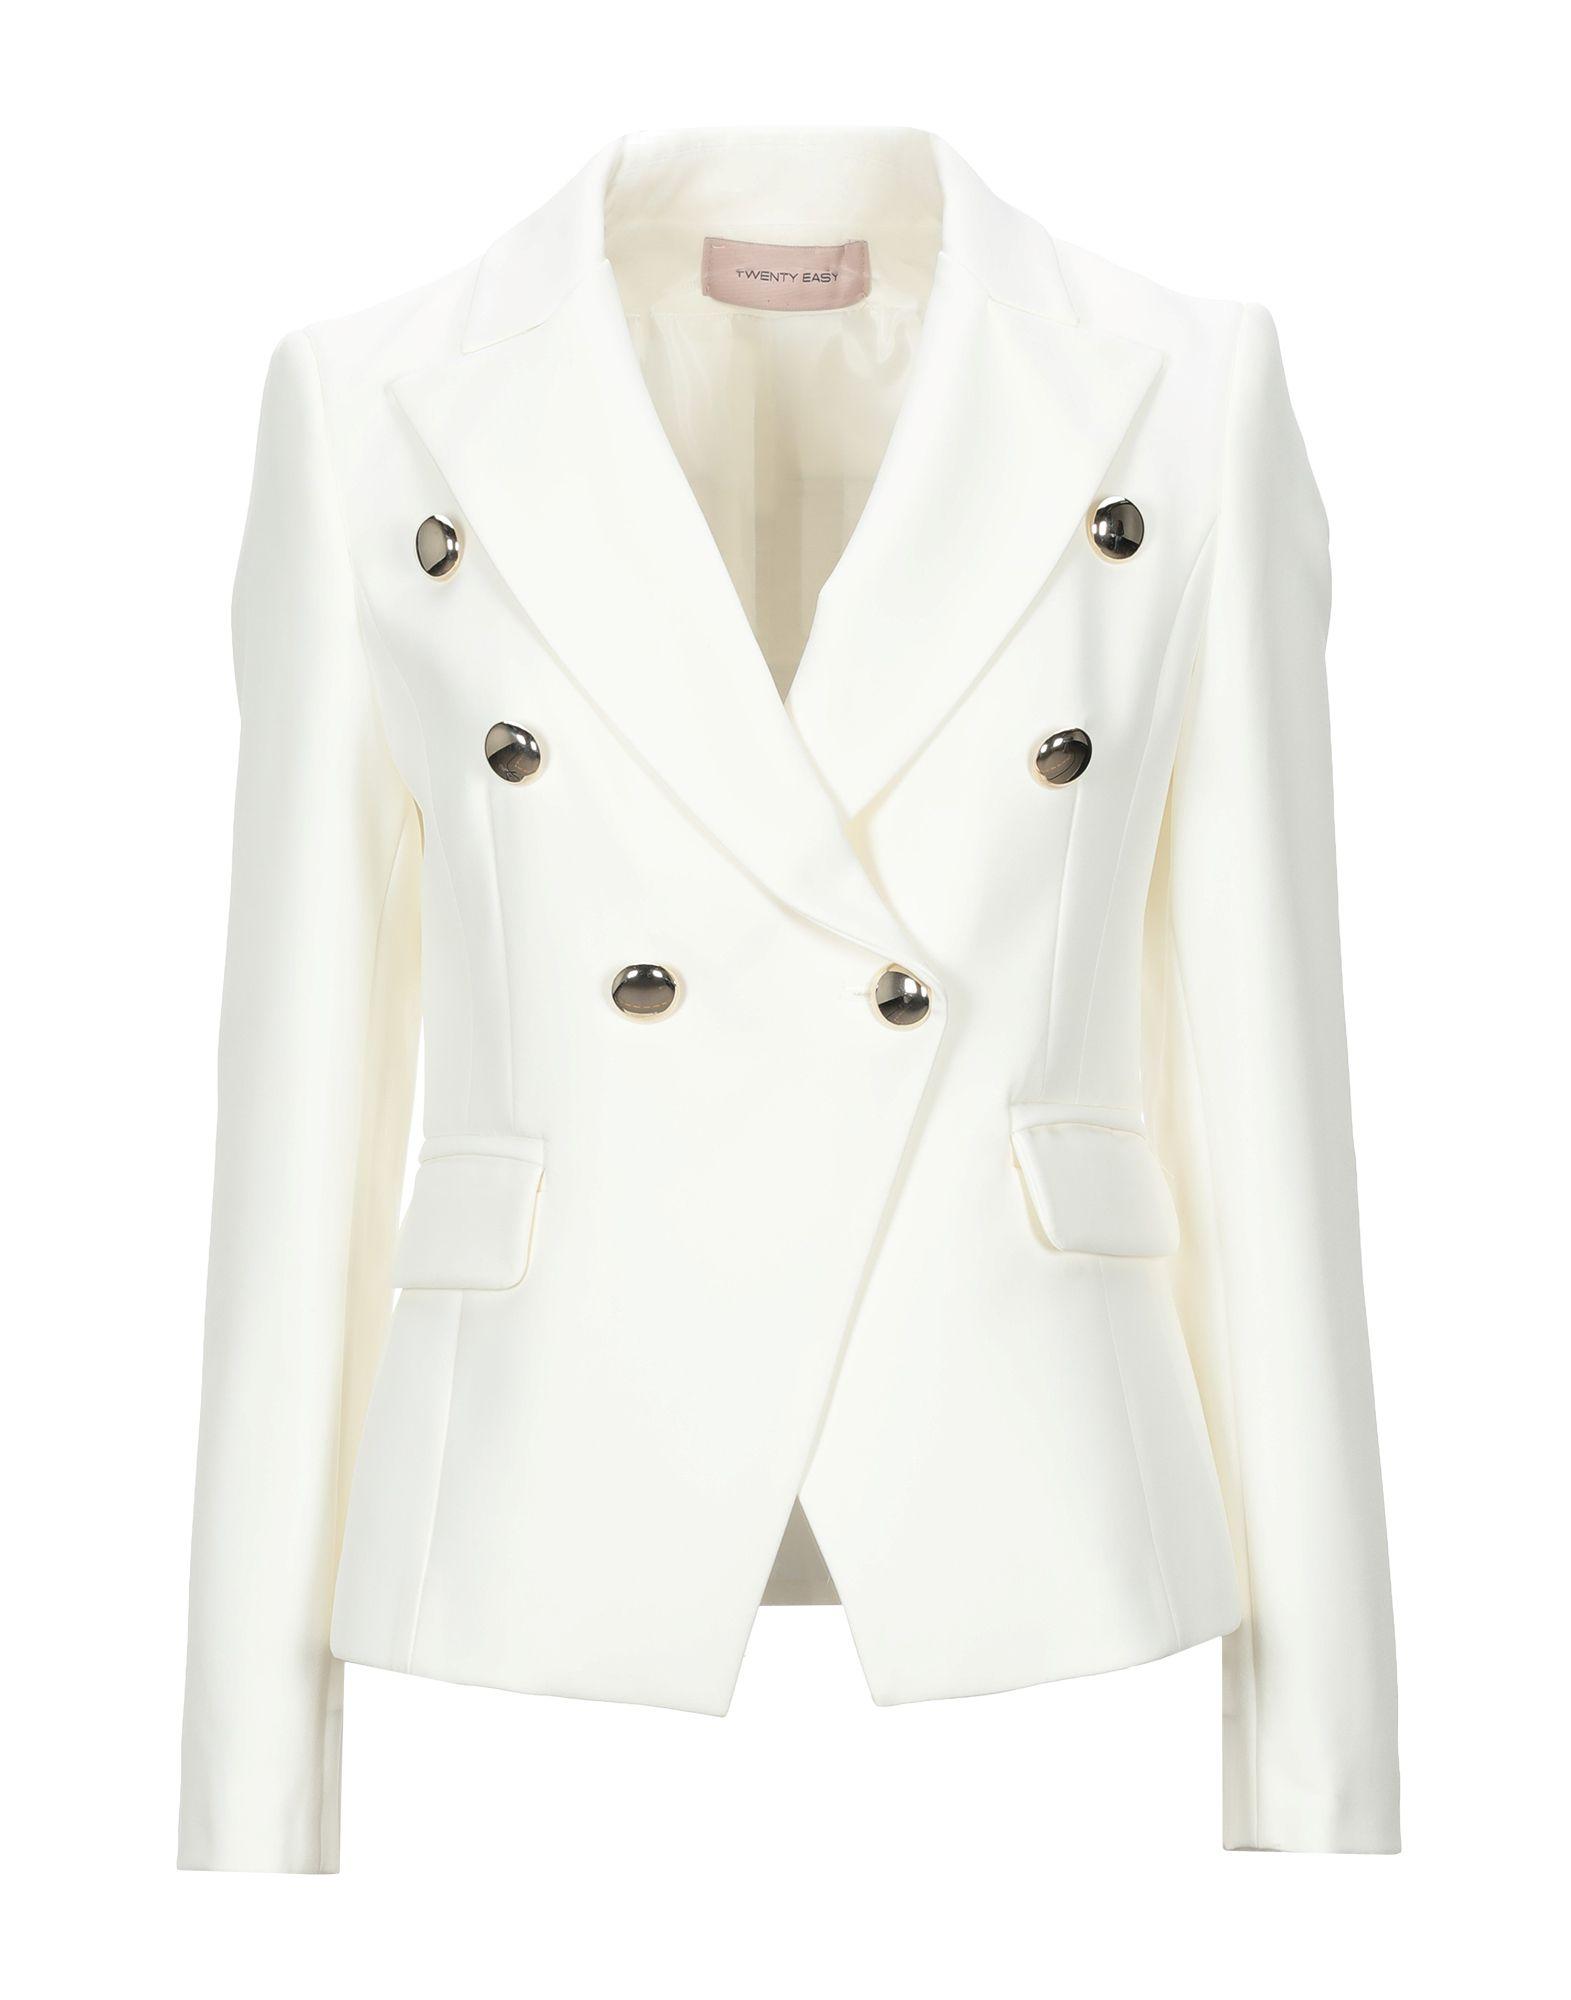 Twenty Easy By Kaos Synthetic Suit Jacket in Ivory (White) - Lyst